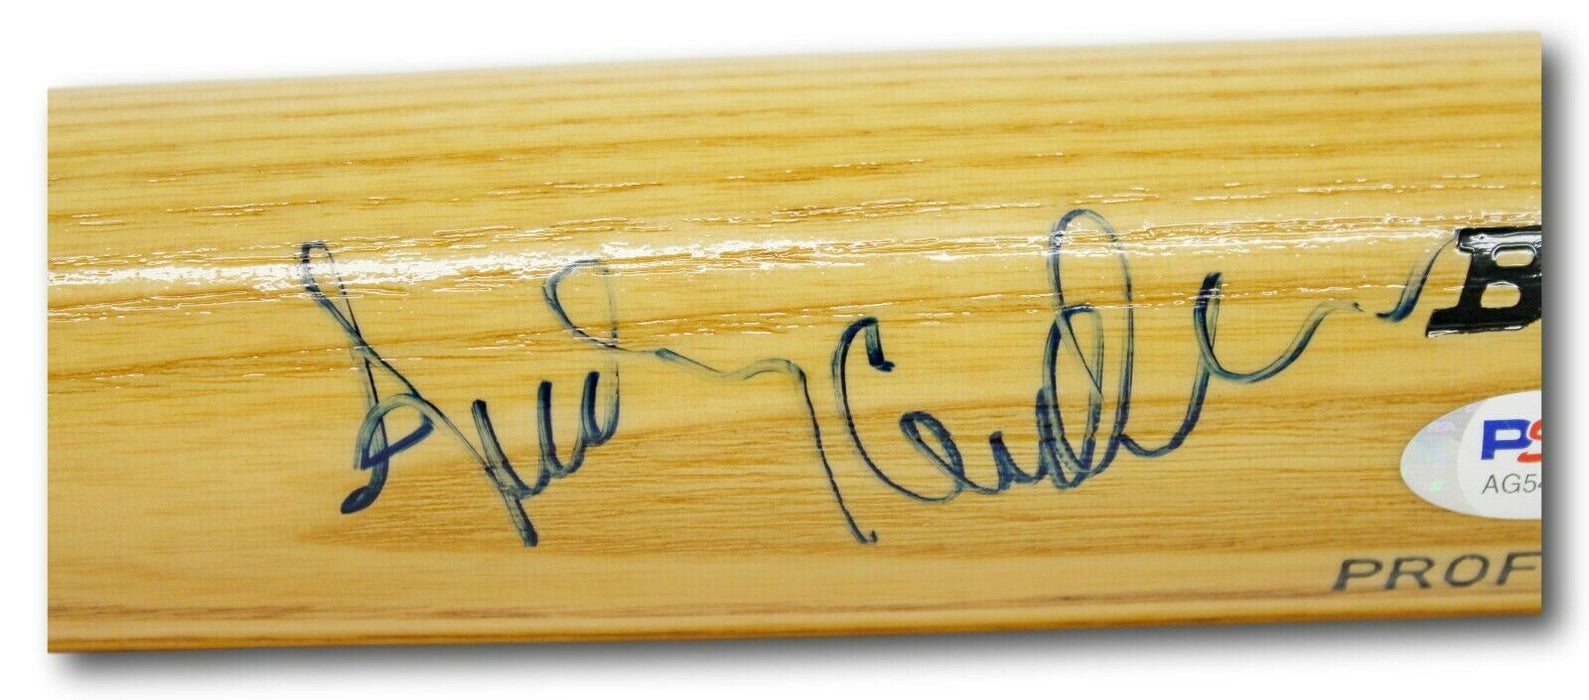 Sparky Anderson Signed Houston Astros Autographed Baseball Bat Tigers AG54415 PSA/DNA COA